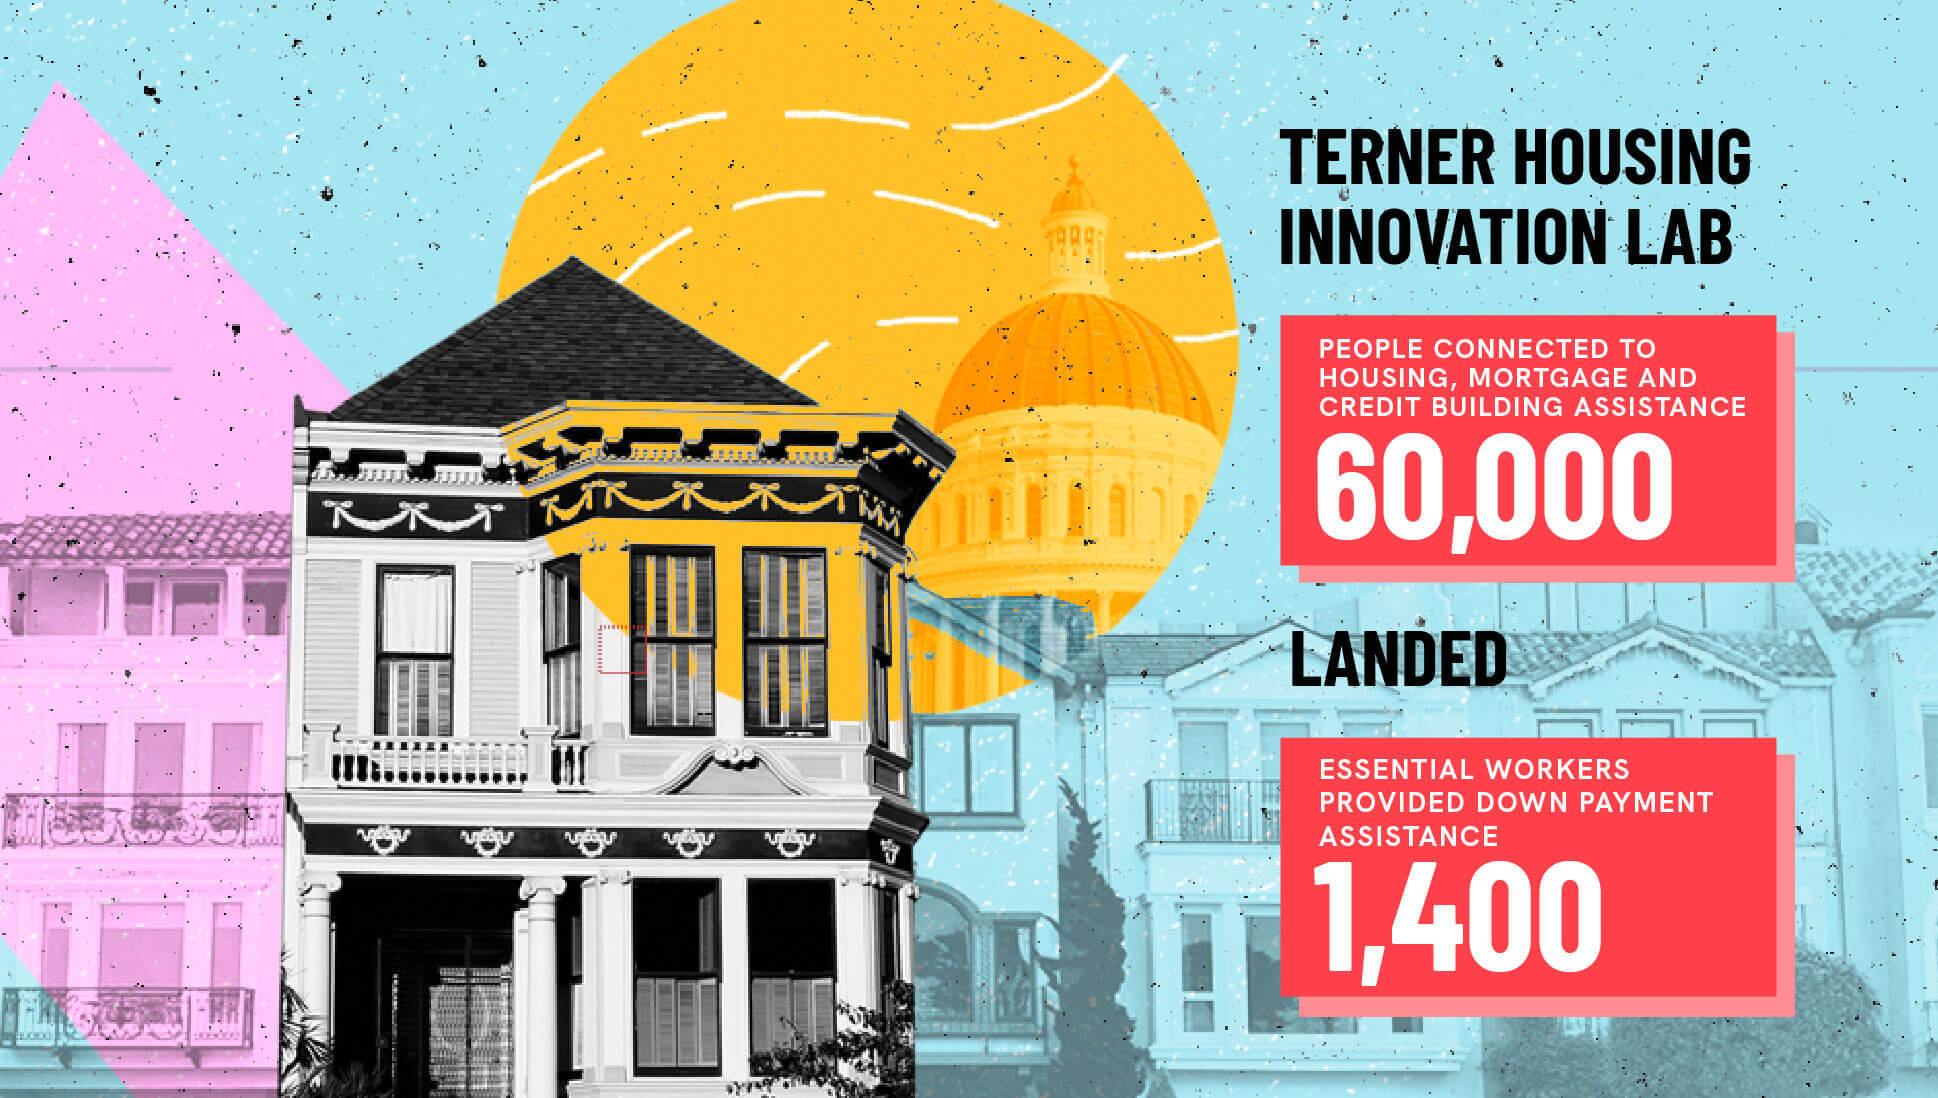 CZI's partnership with Terner Housing Innovation Lab connected 60,000 people with housing, mortgage and credit assistance and provided 1,400 essential workers with down payment help.